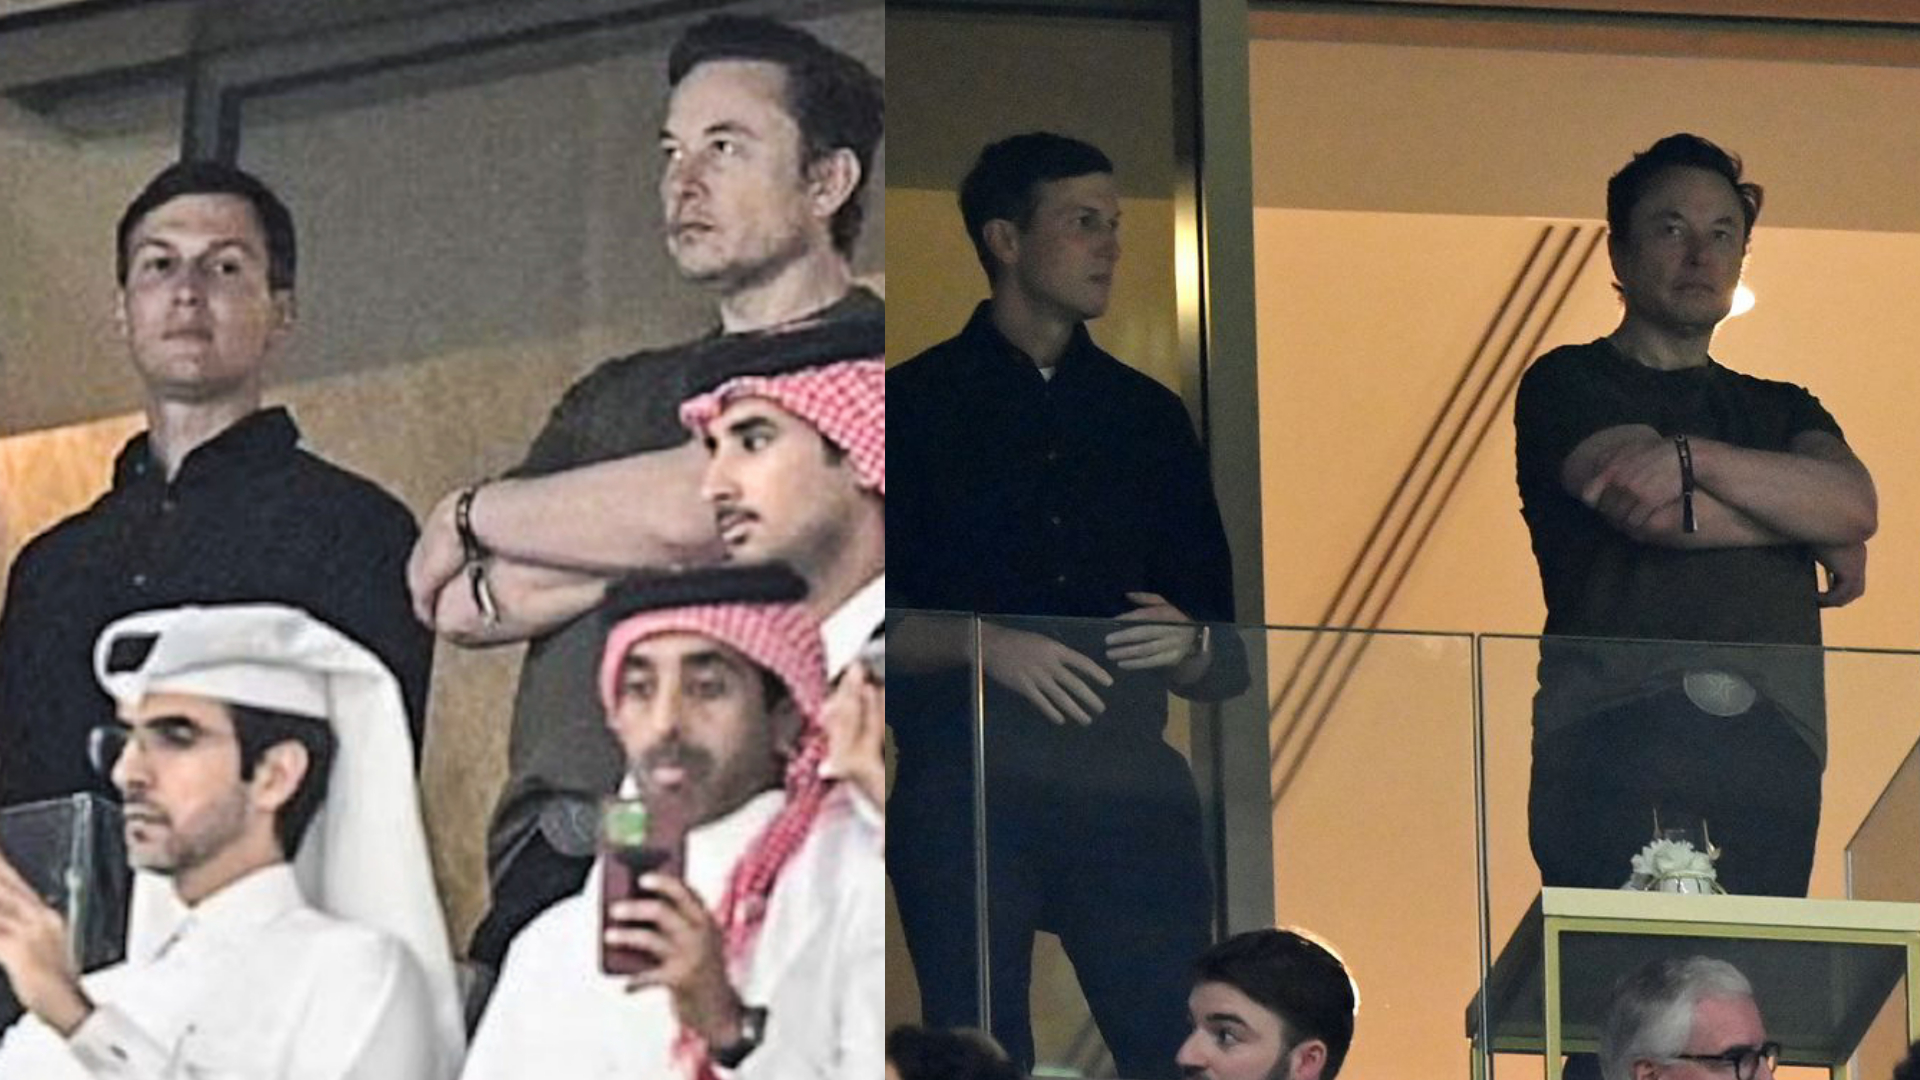 Elon Musk and Jared Kushner seen together at World Cup final in Qatar